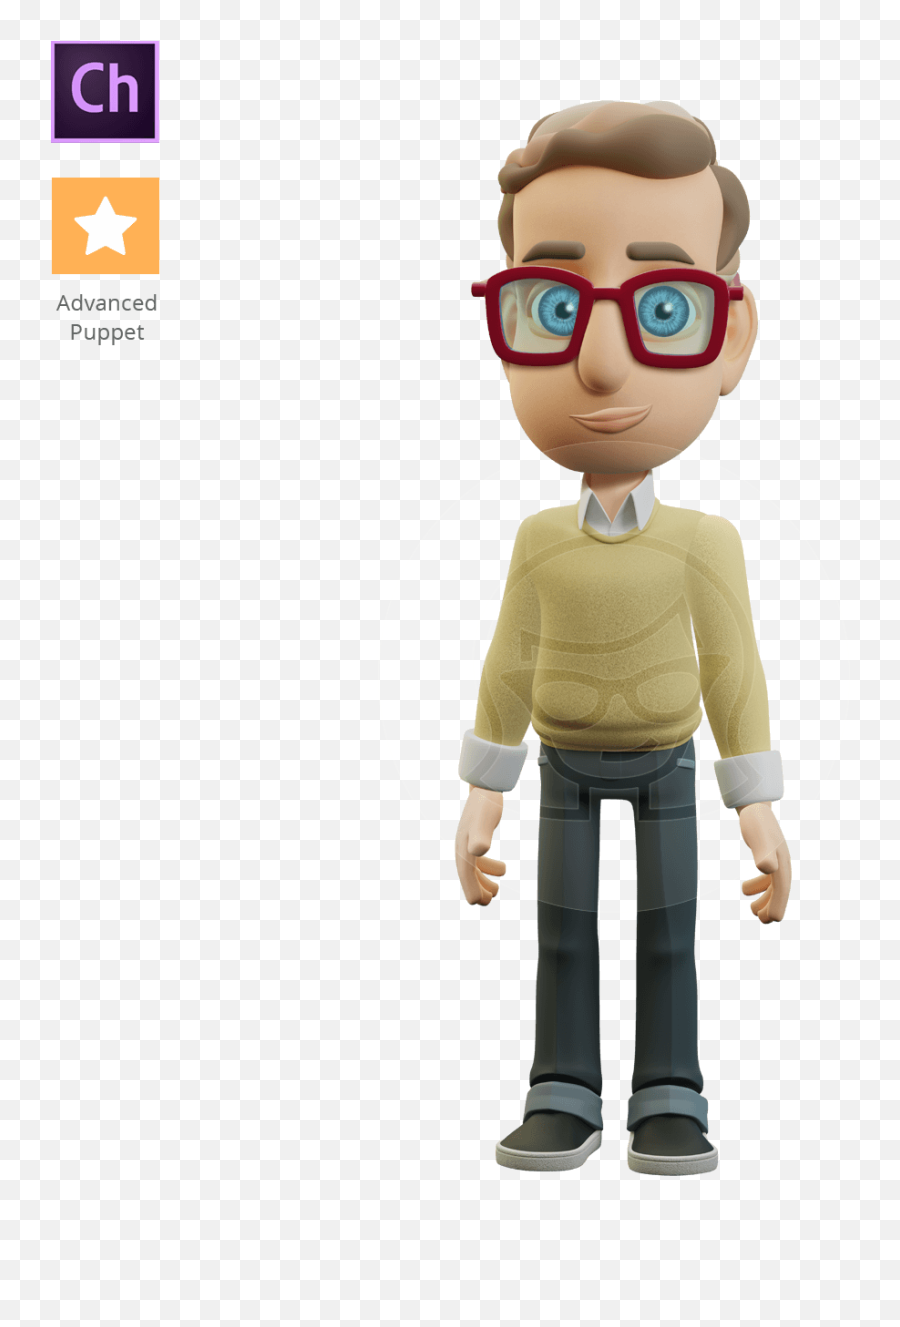 Smart 3d Boy Character Animator Puppet Emoji,Animating Emotion In Poser Characters